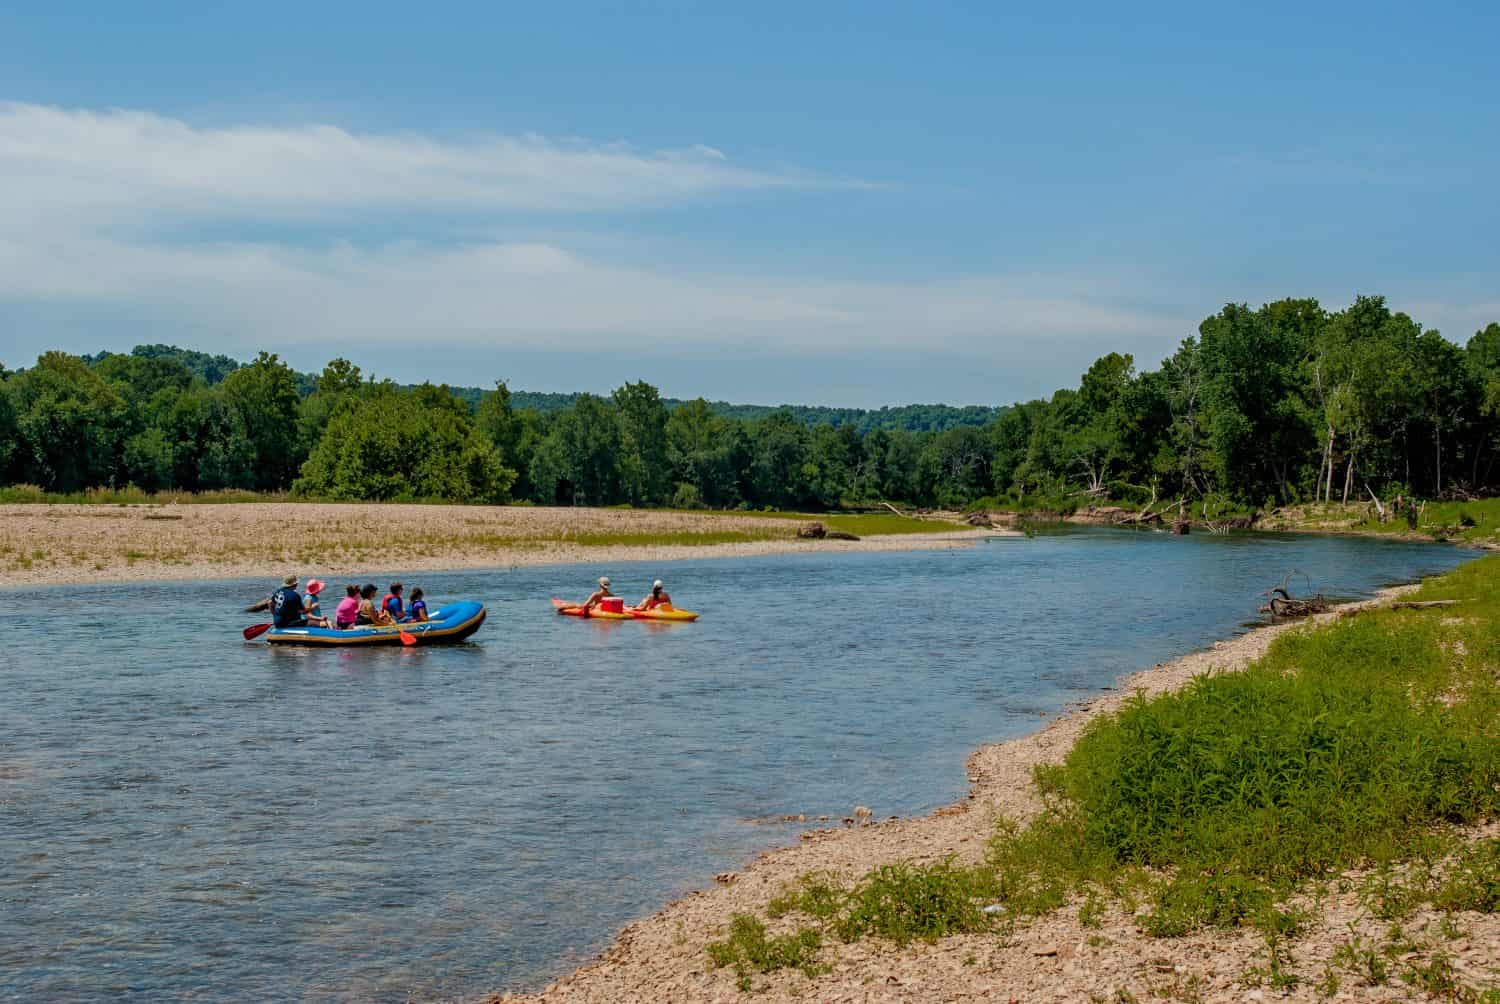 Tourists rafting down the river on a summer day with trees and blue sky